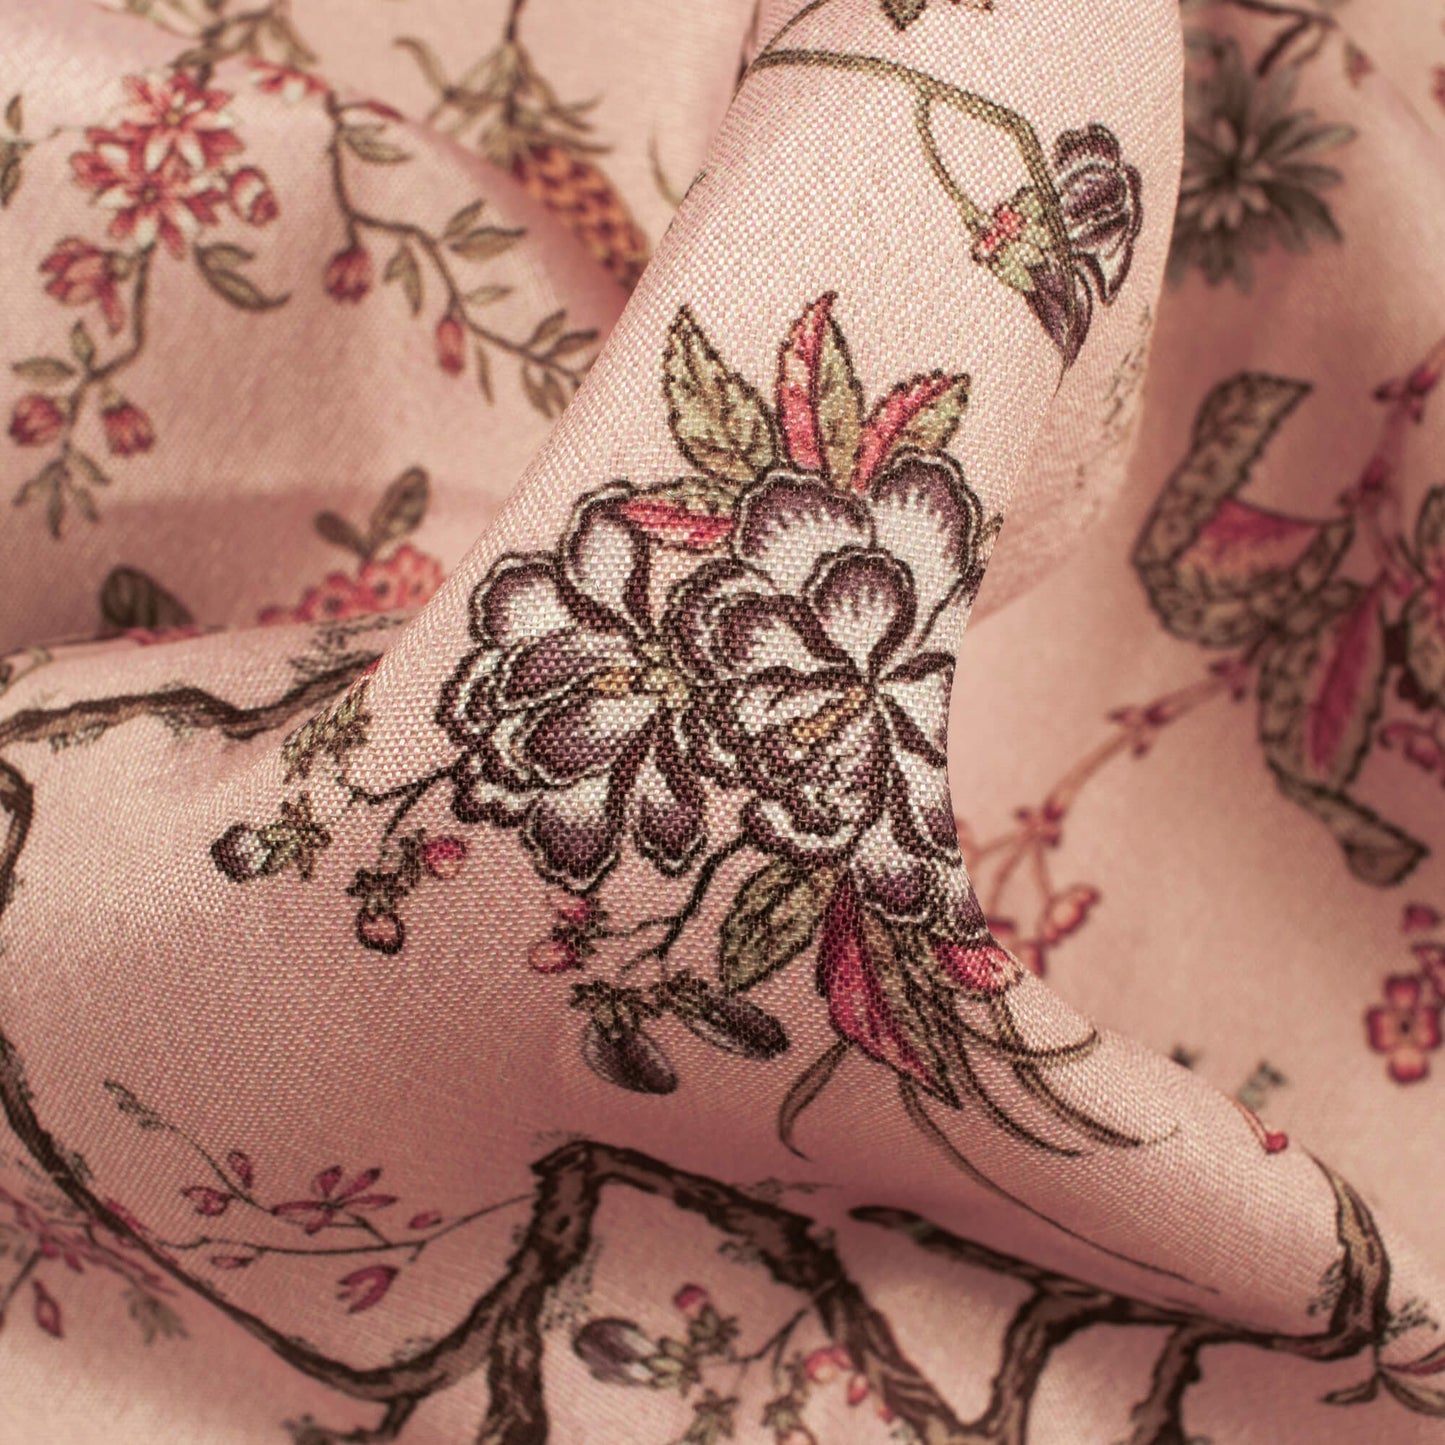 Peach And Pink Floral Pattern Digital Print Crepe Silk Fabric